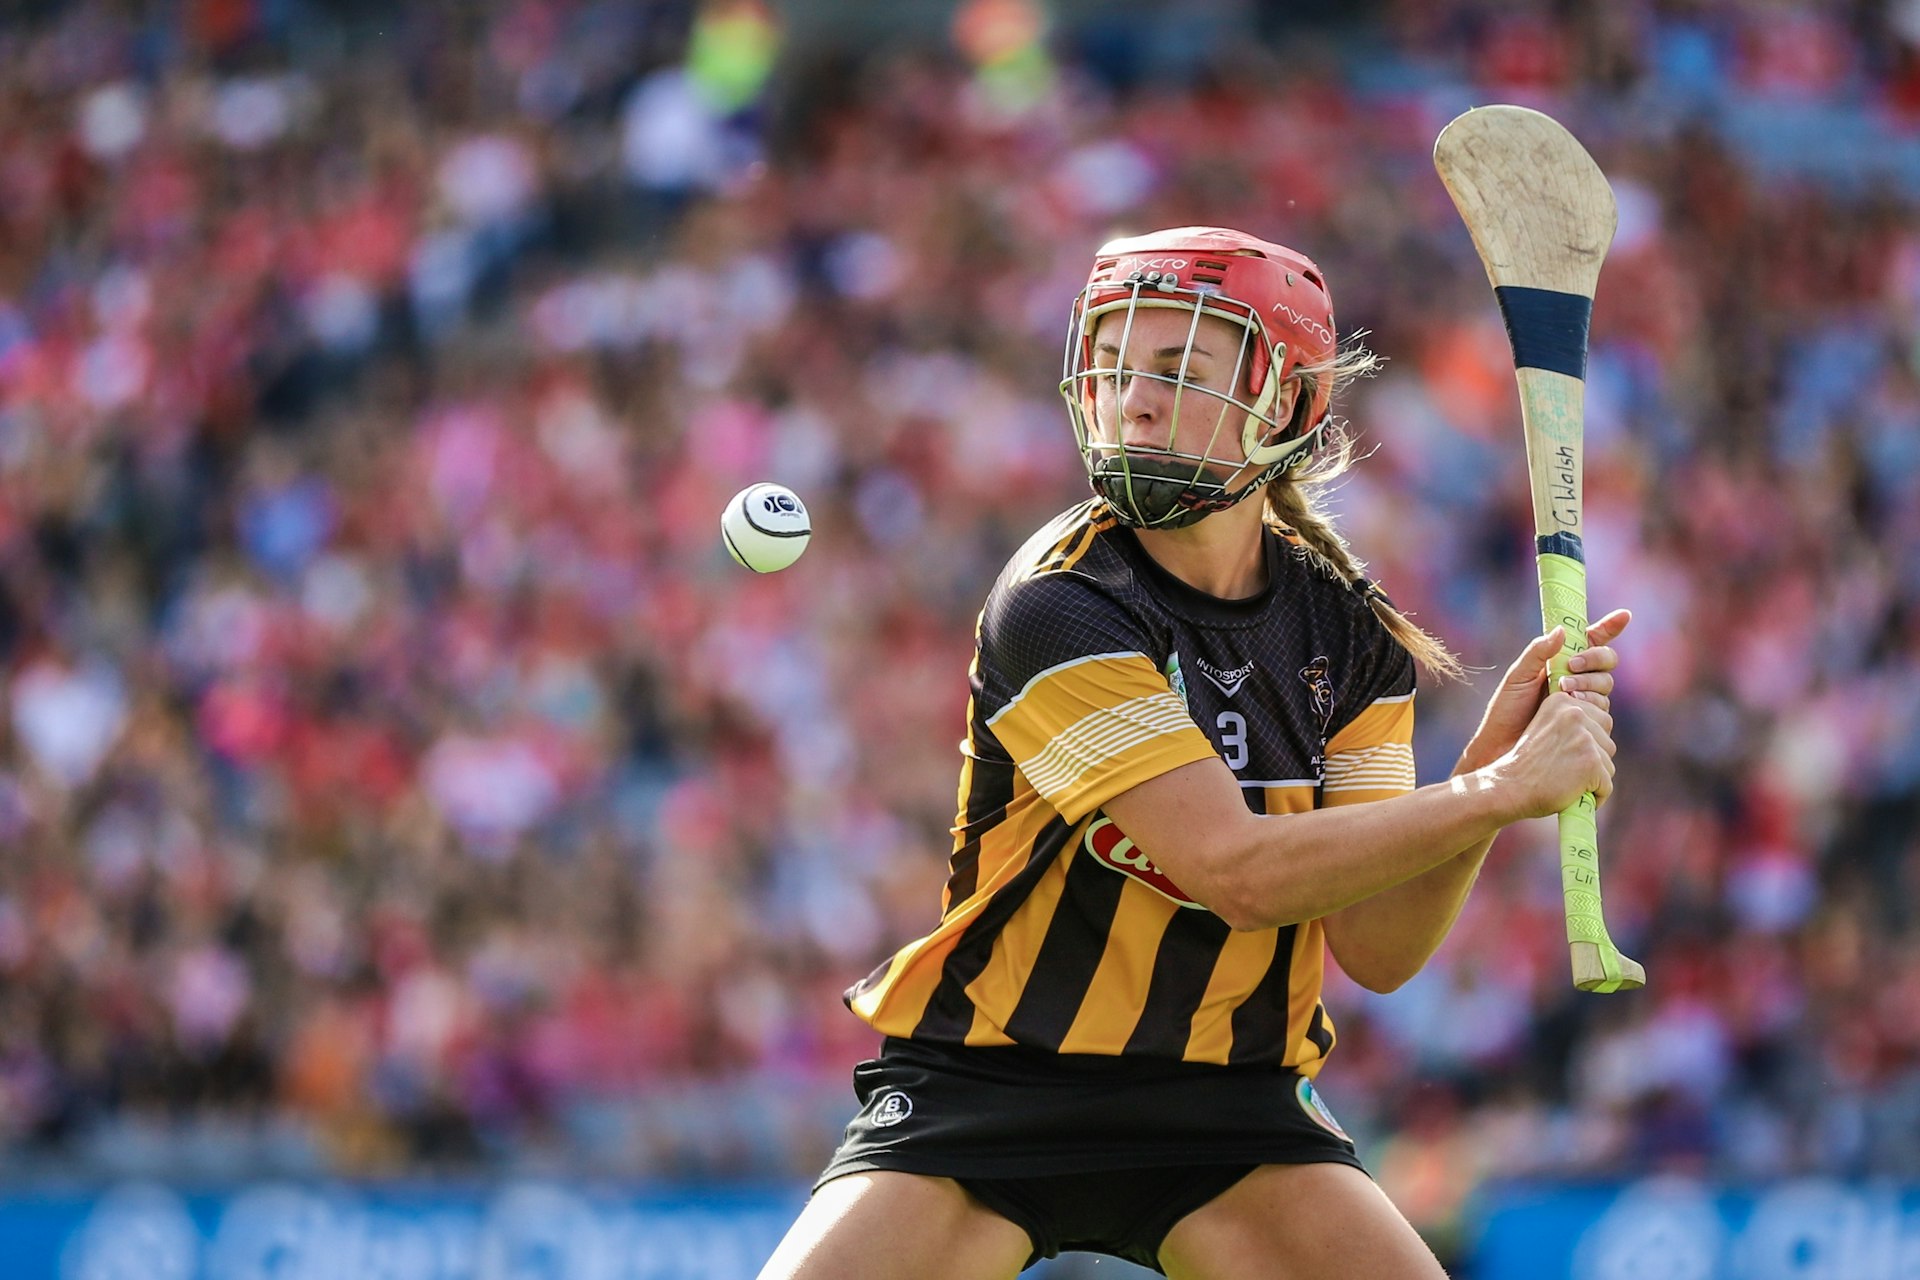 A helmeted woman Camogie player in gold and black stripes prepares to hit the sliotar during a game